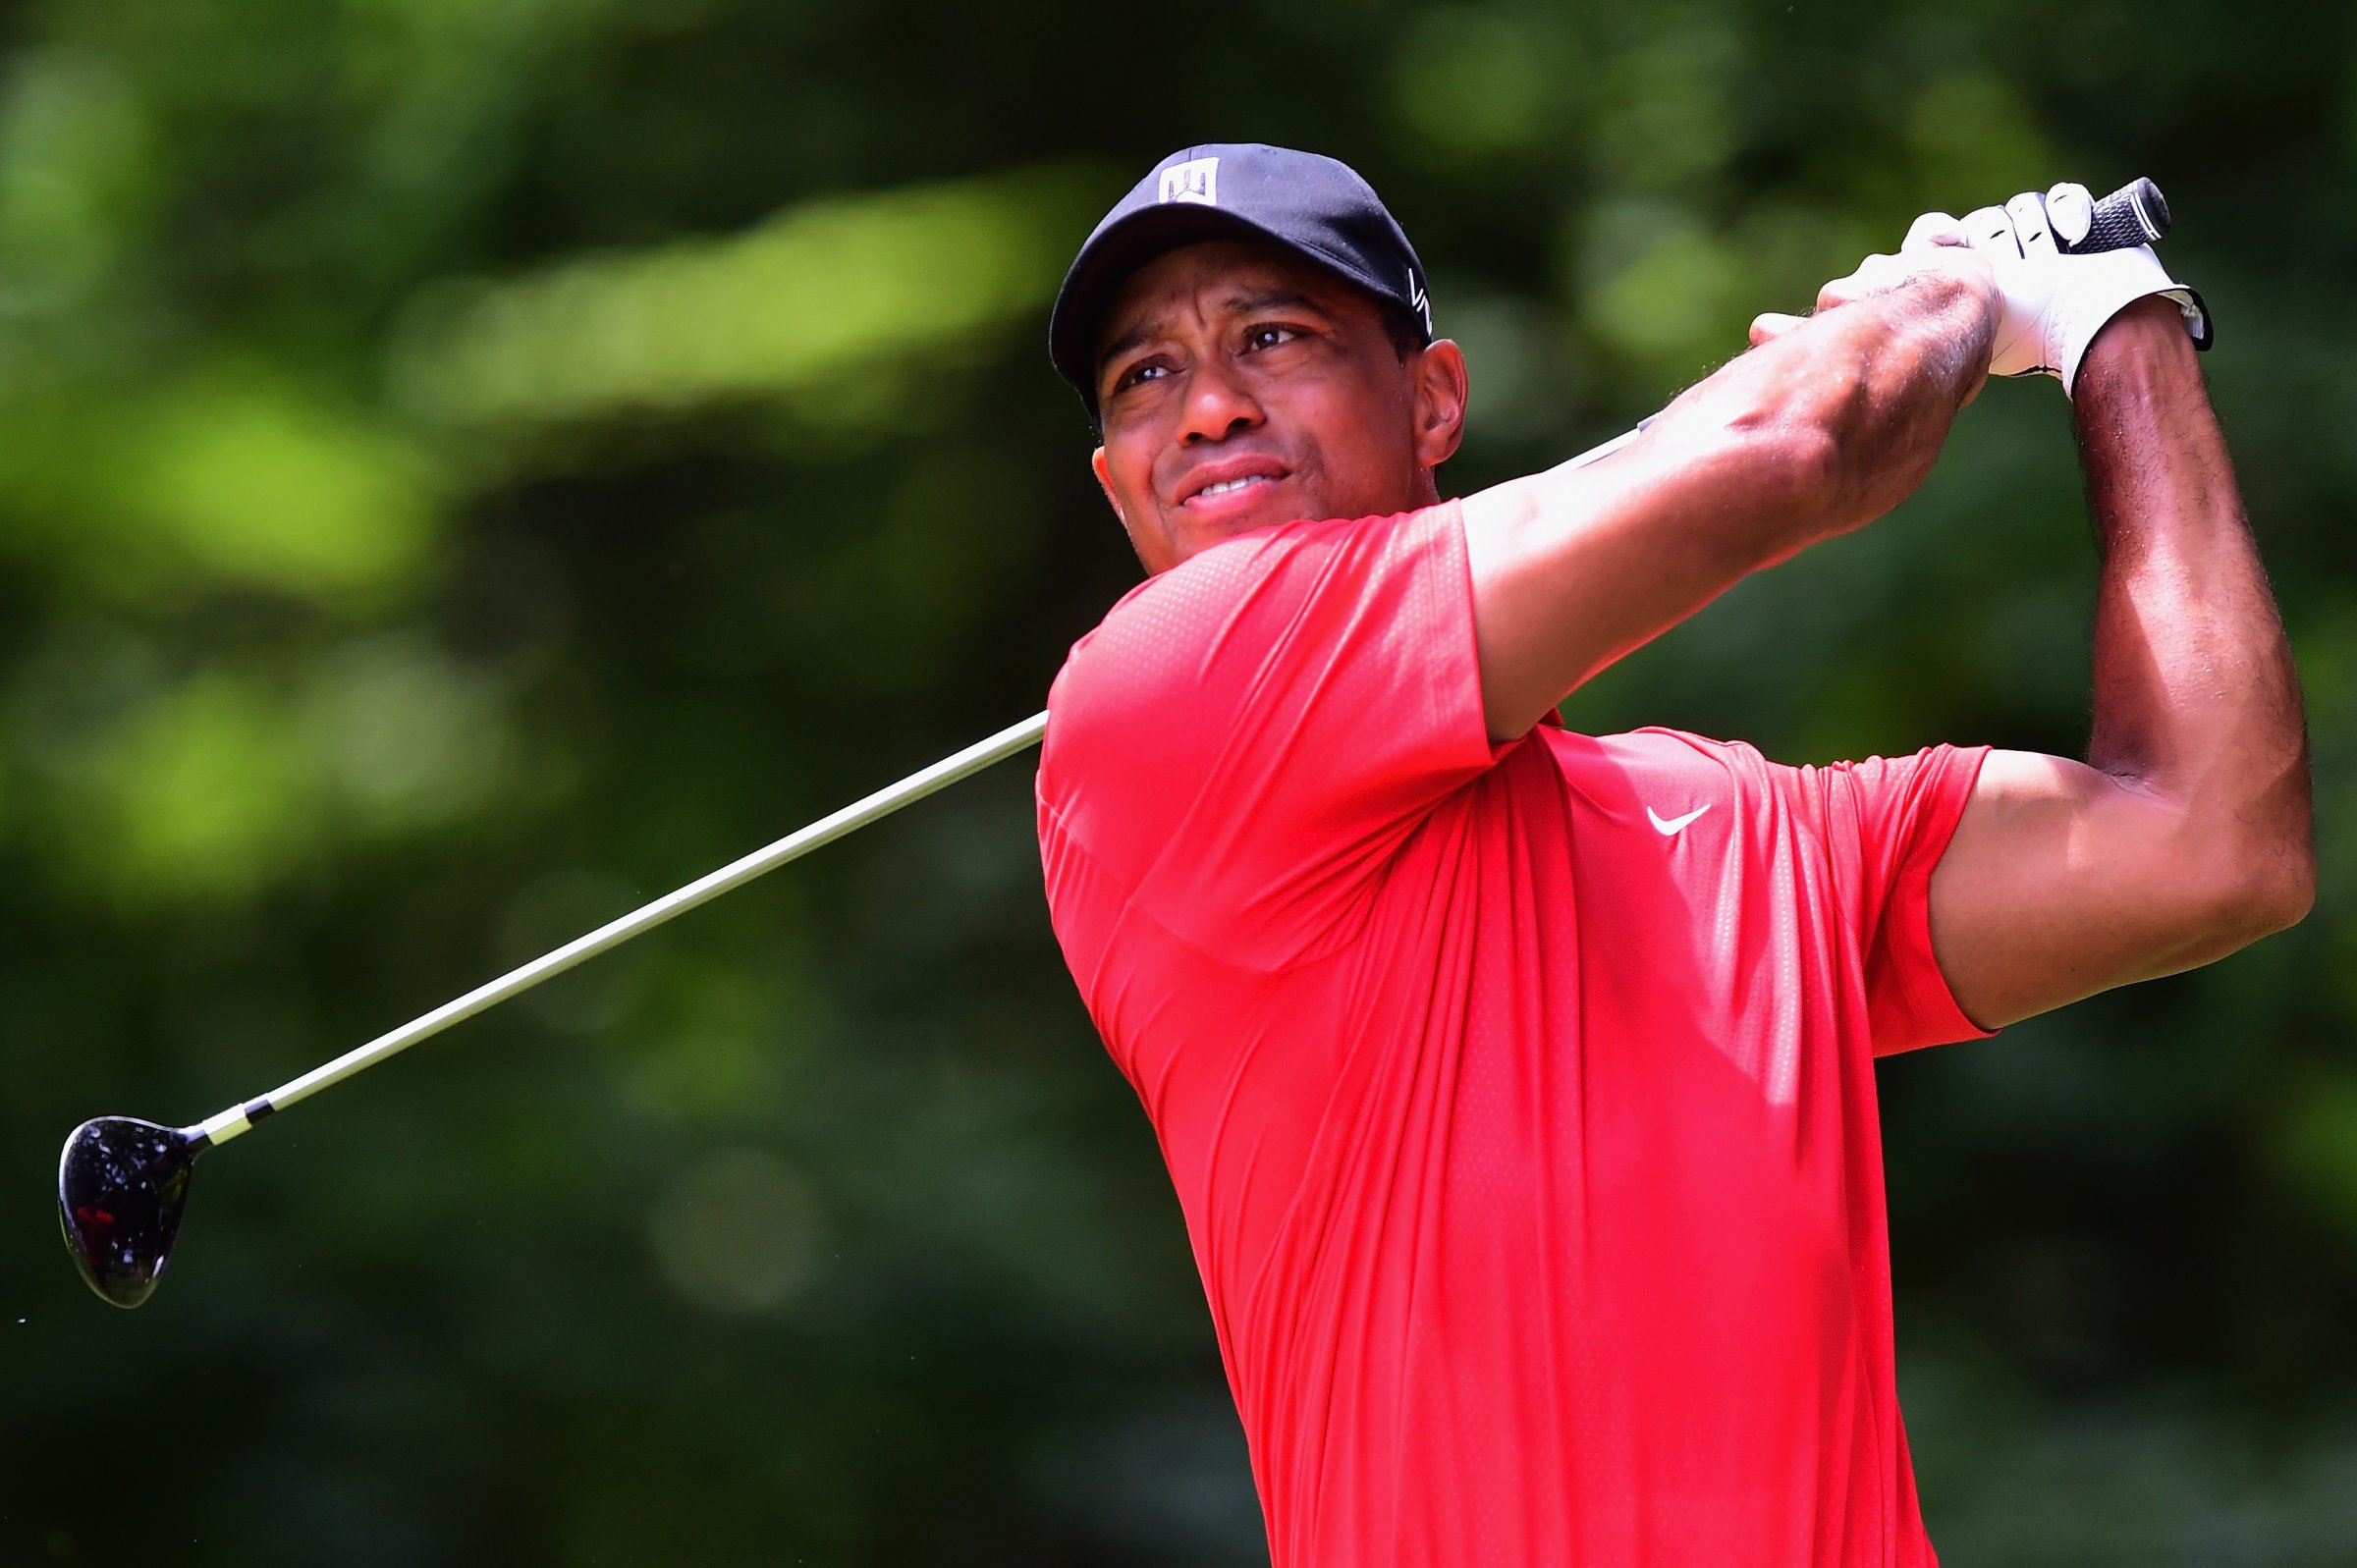 Tiger Woods tees off on the second hole during the final round of the Wyndham Championship at Sedgefield Country Club on August 23, 2015 in Greensboro, North Carolina.